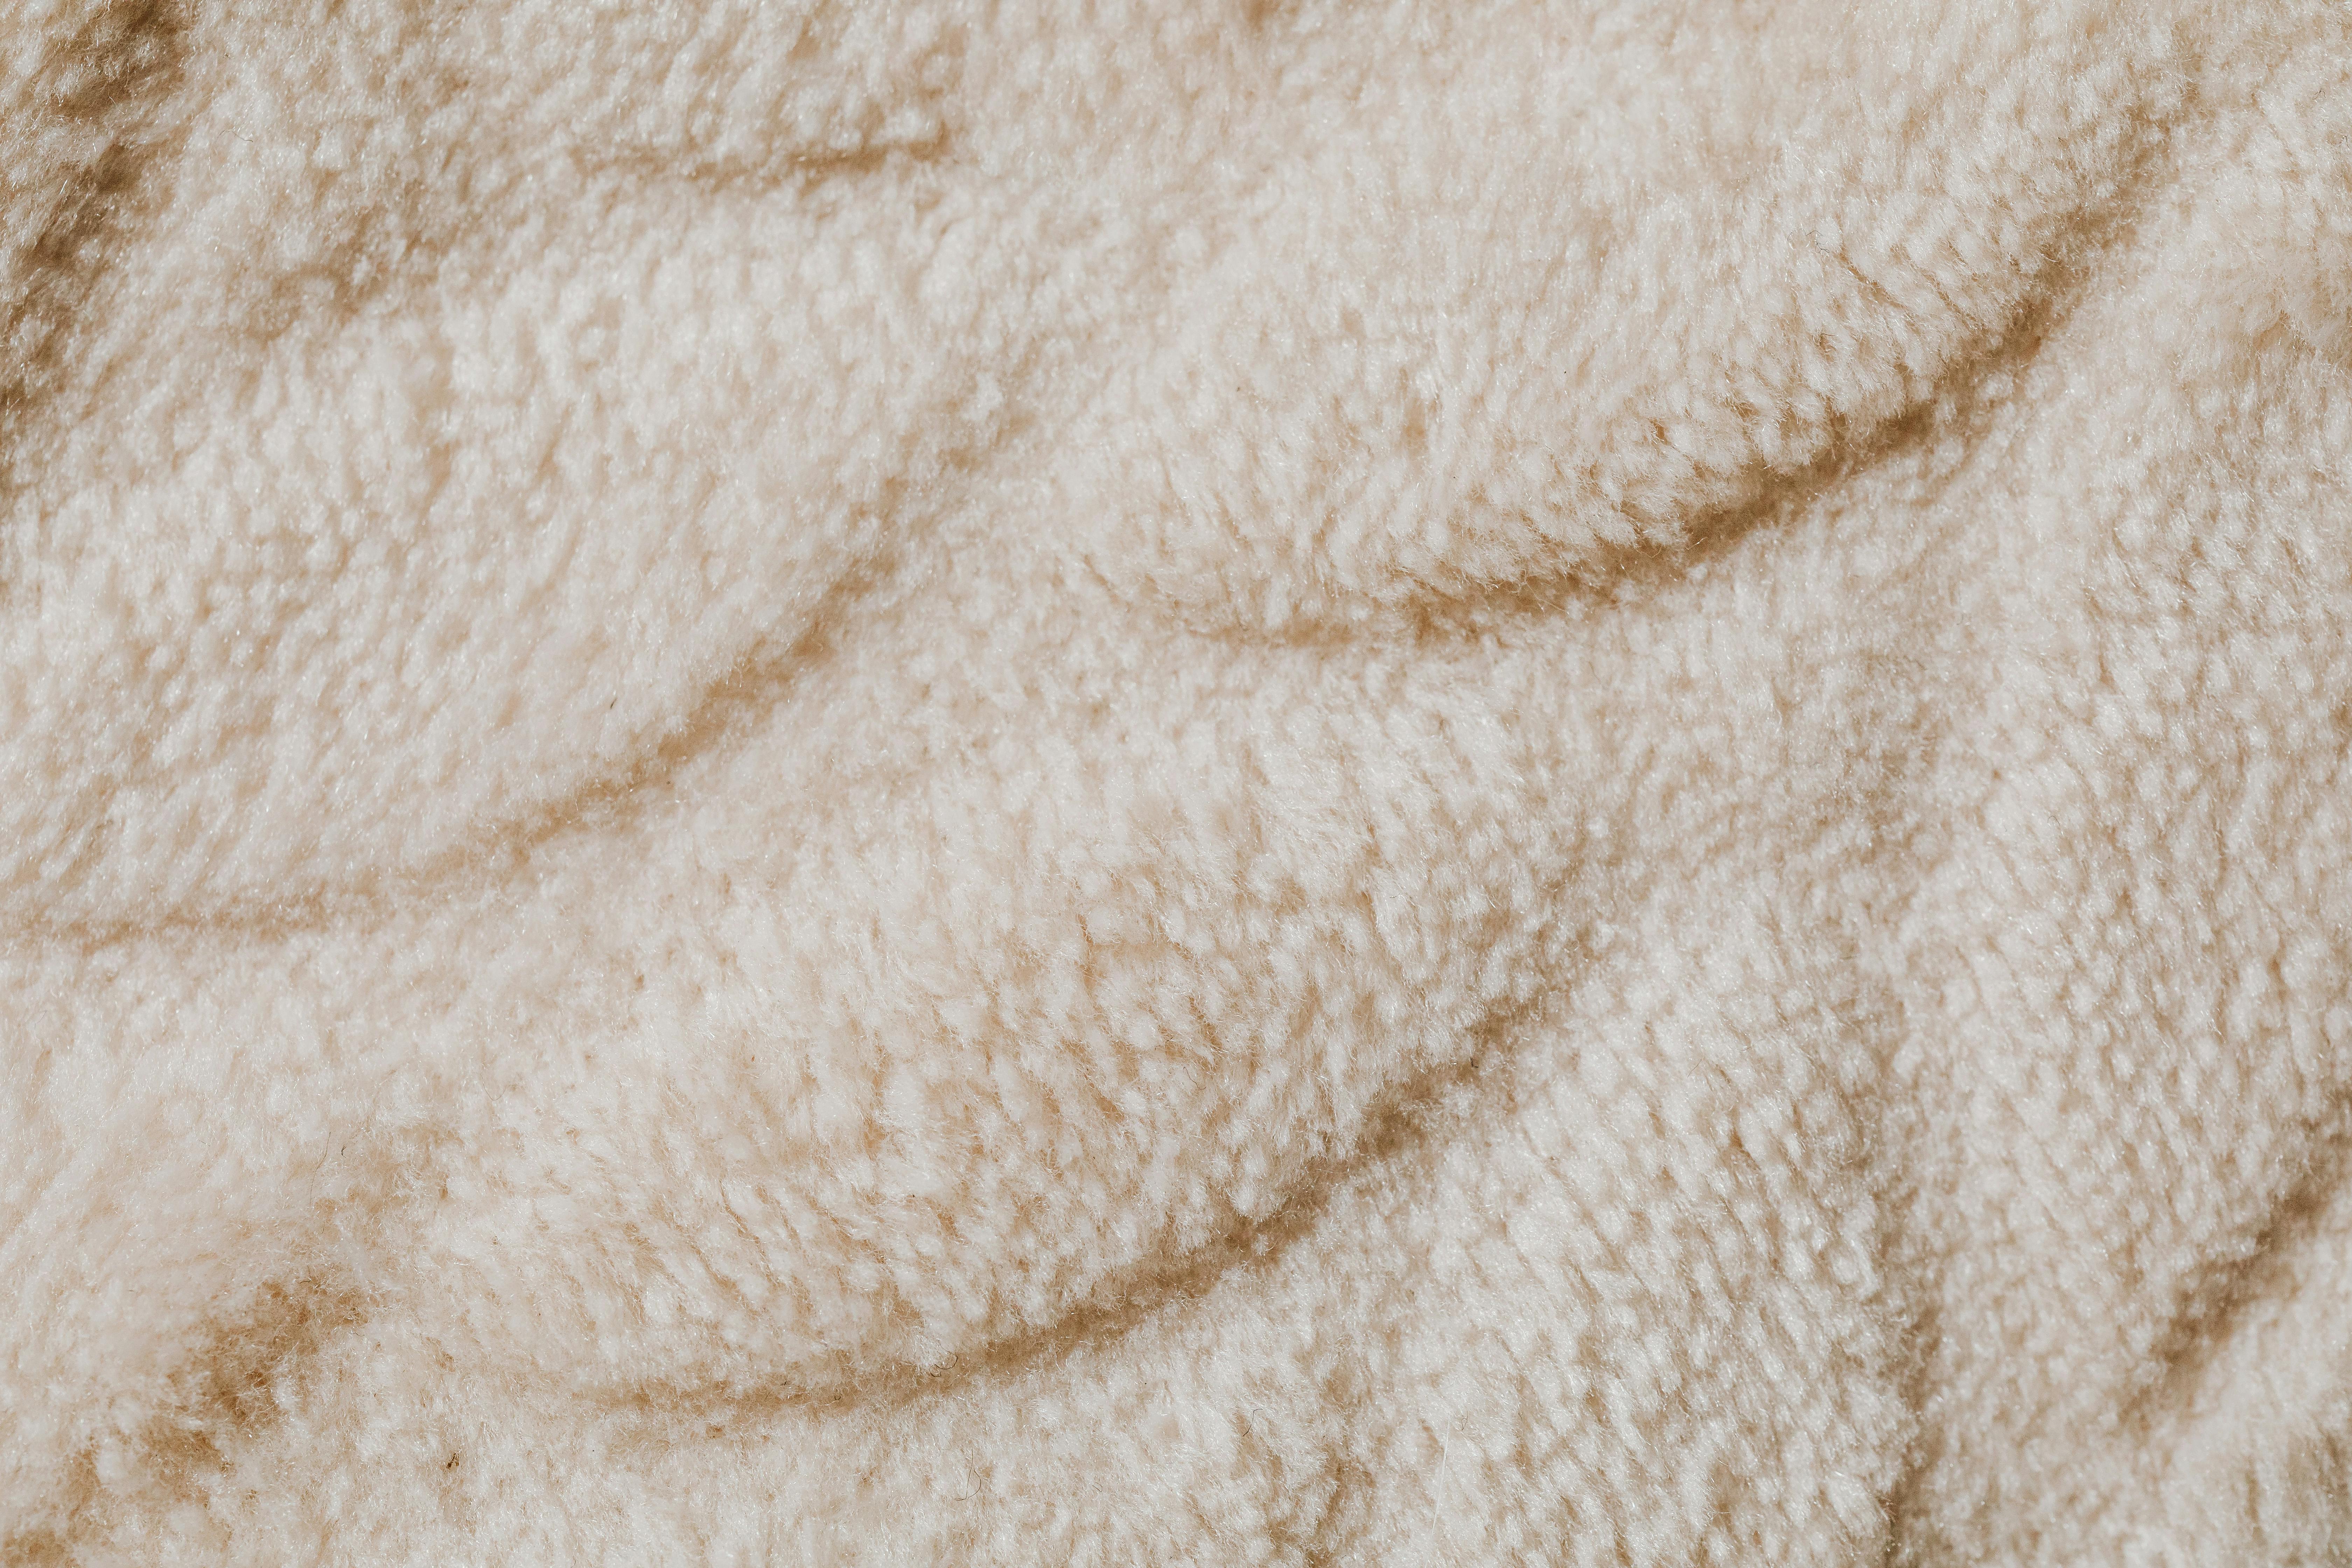 Brown sherpa textured plush fabric material background Stock Photo